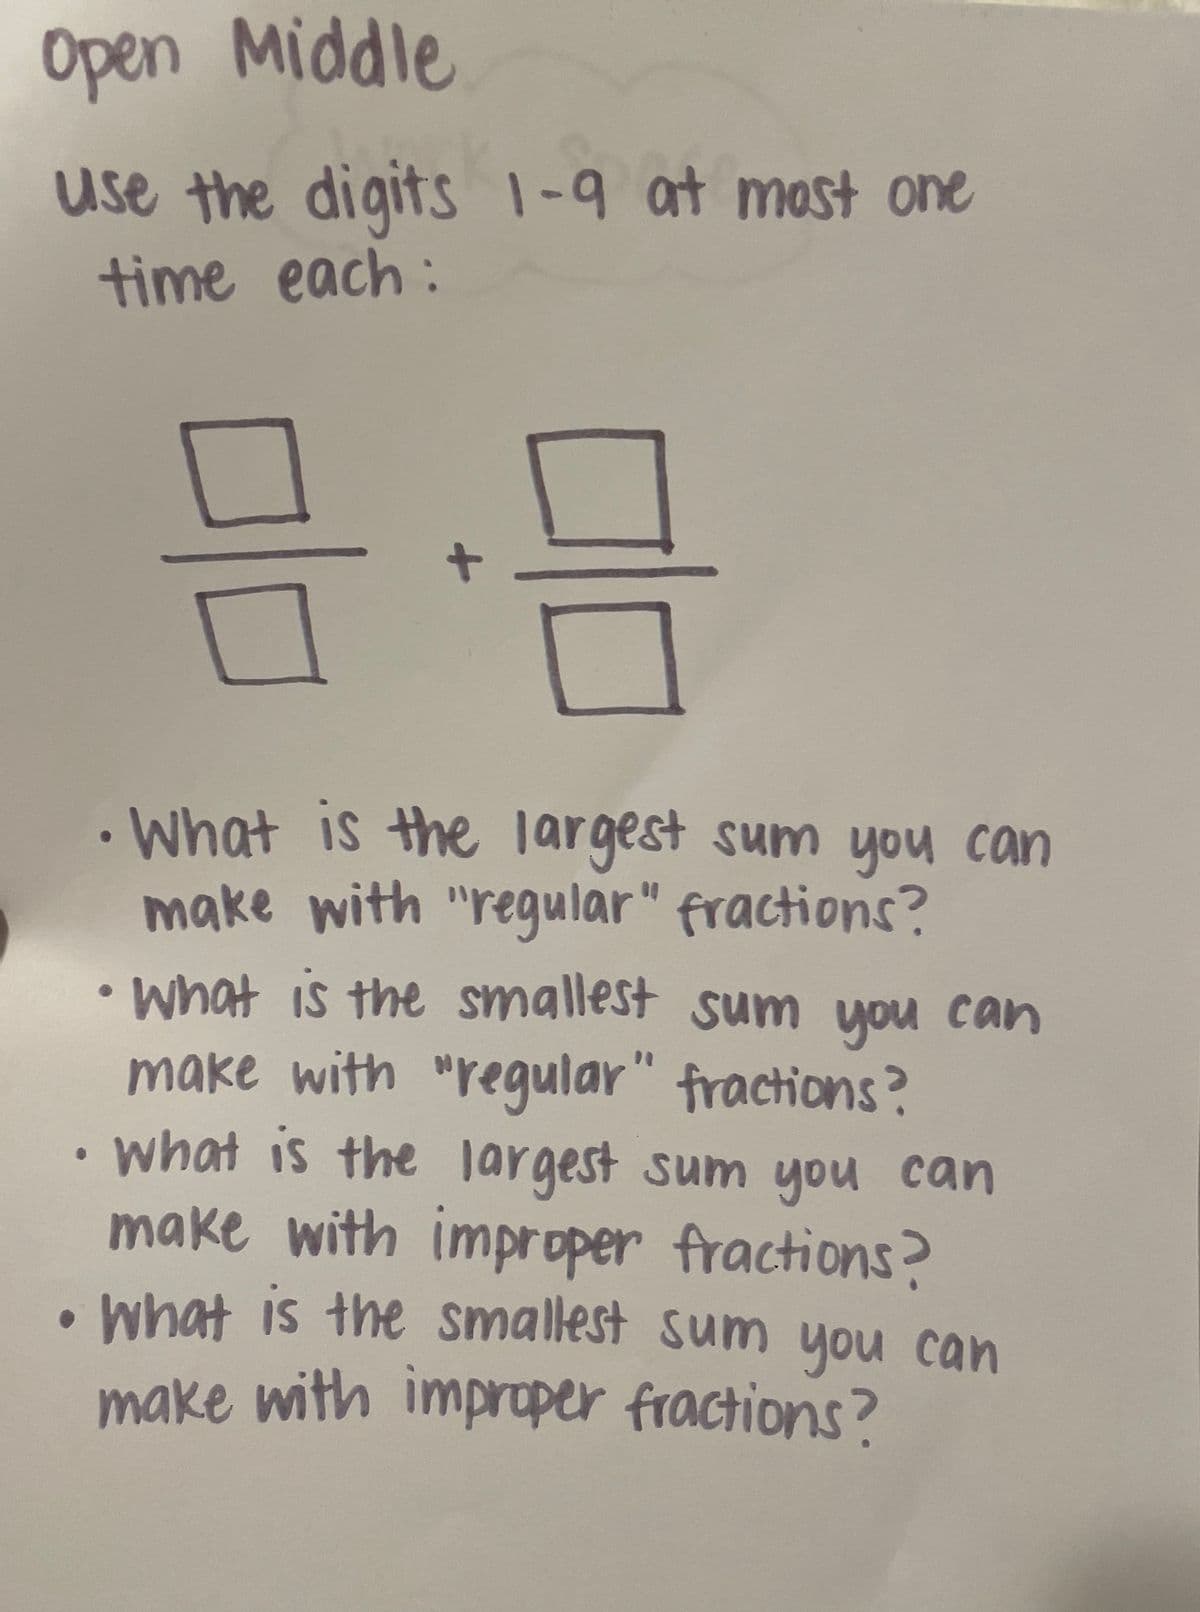 Open Middle
use the digits 1-9 at most one
time each:
• What is the largest sum you can
make with "regular" fractions?
•What is the smallest sum you can
make with "regular" fractions?
•what is the jargest sum you can
make with improper fractions?
what is the smallest sum you can
make with impraper fractions?
